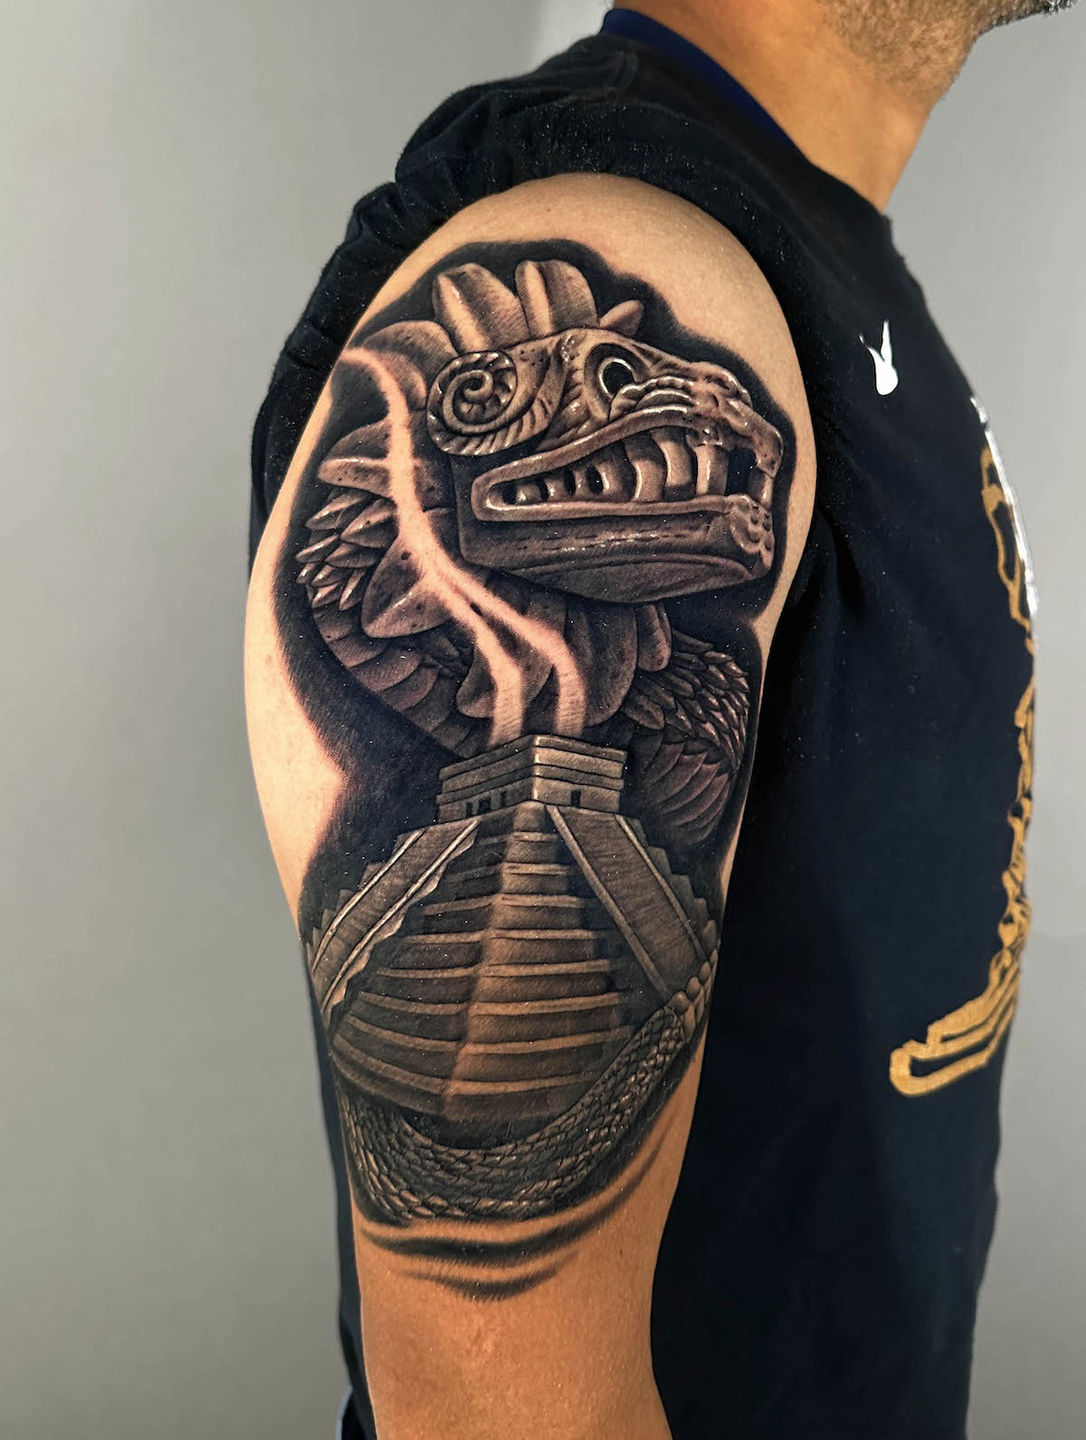 10 Best Aztec Tattoo Ideas Youll Have To See To Believe   Daily Hind  News